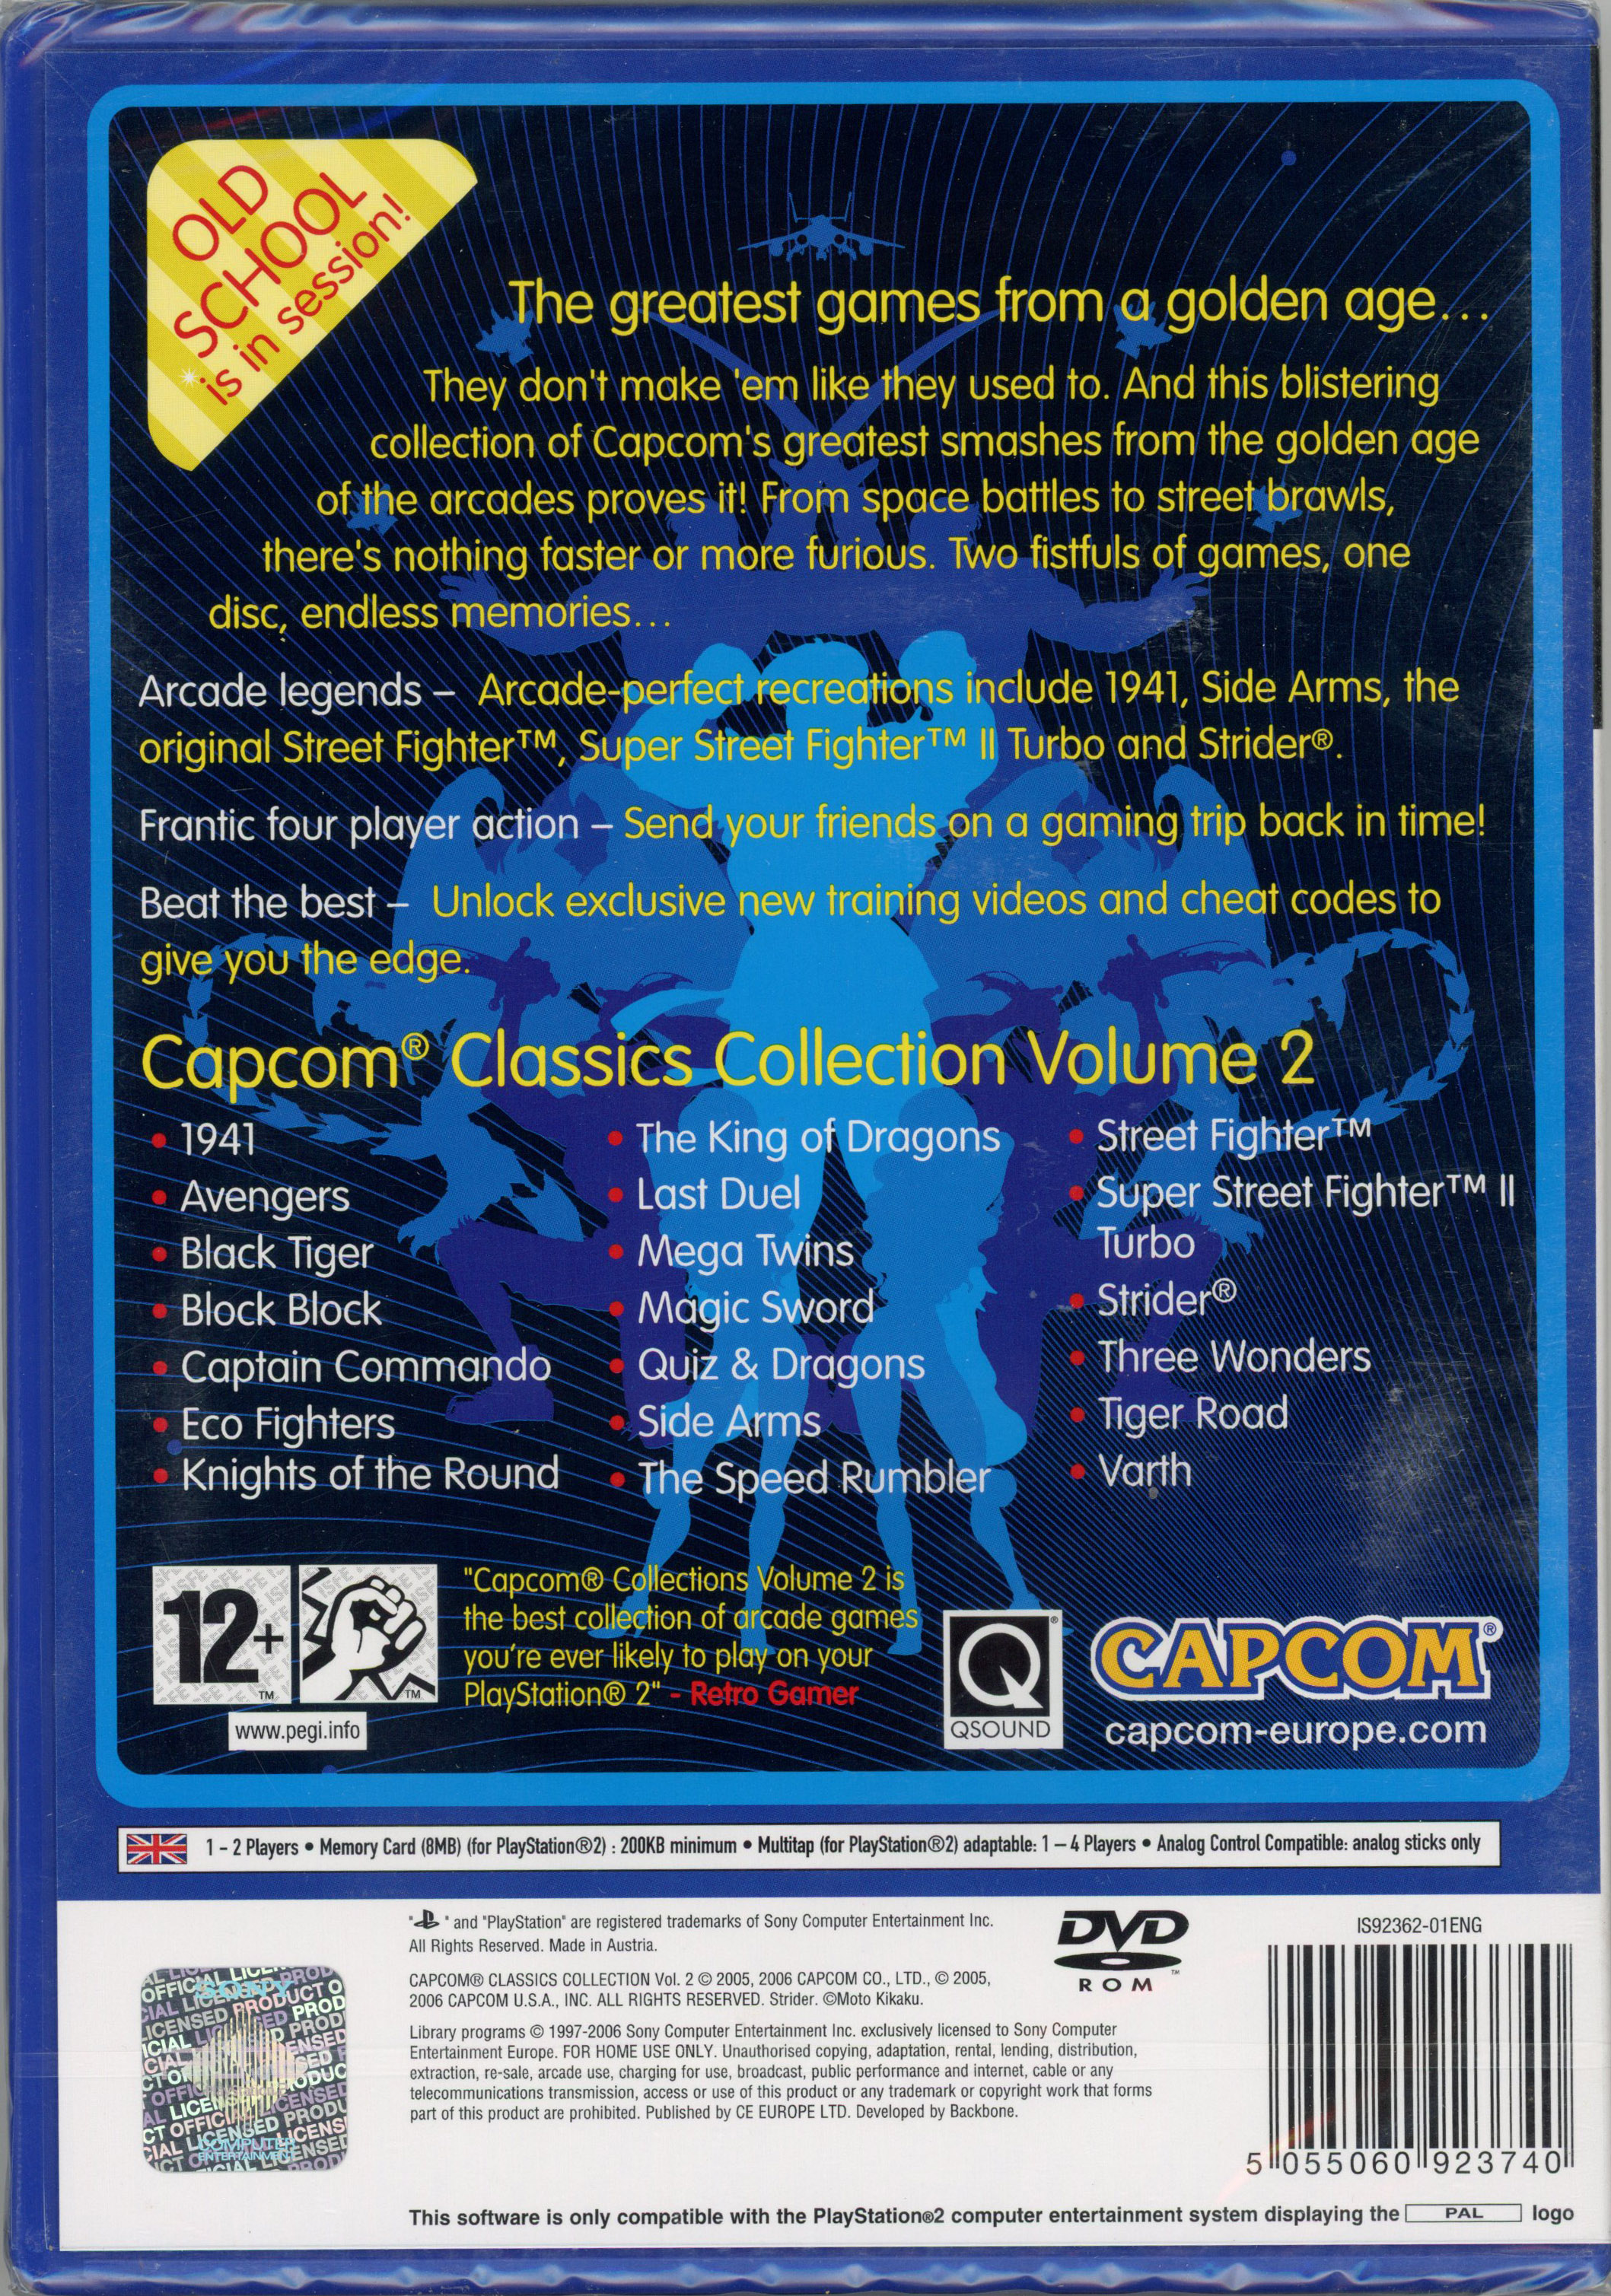 Sony - Capcom Classics Collection Vol. 2 - PlayStation 2 - Factory Sealed - Image 2 of 2